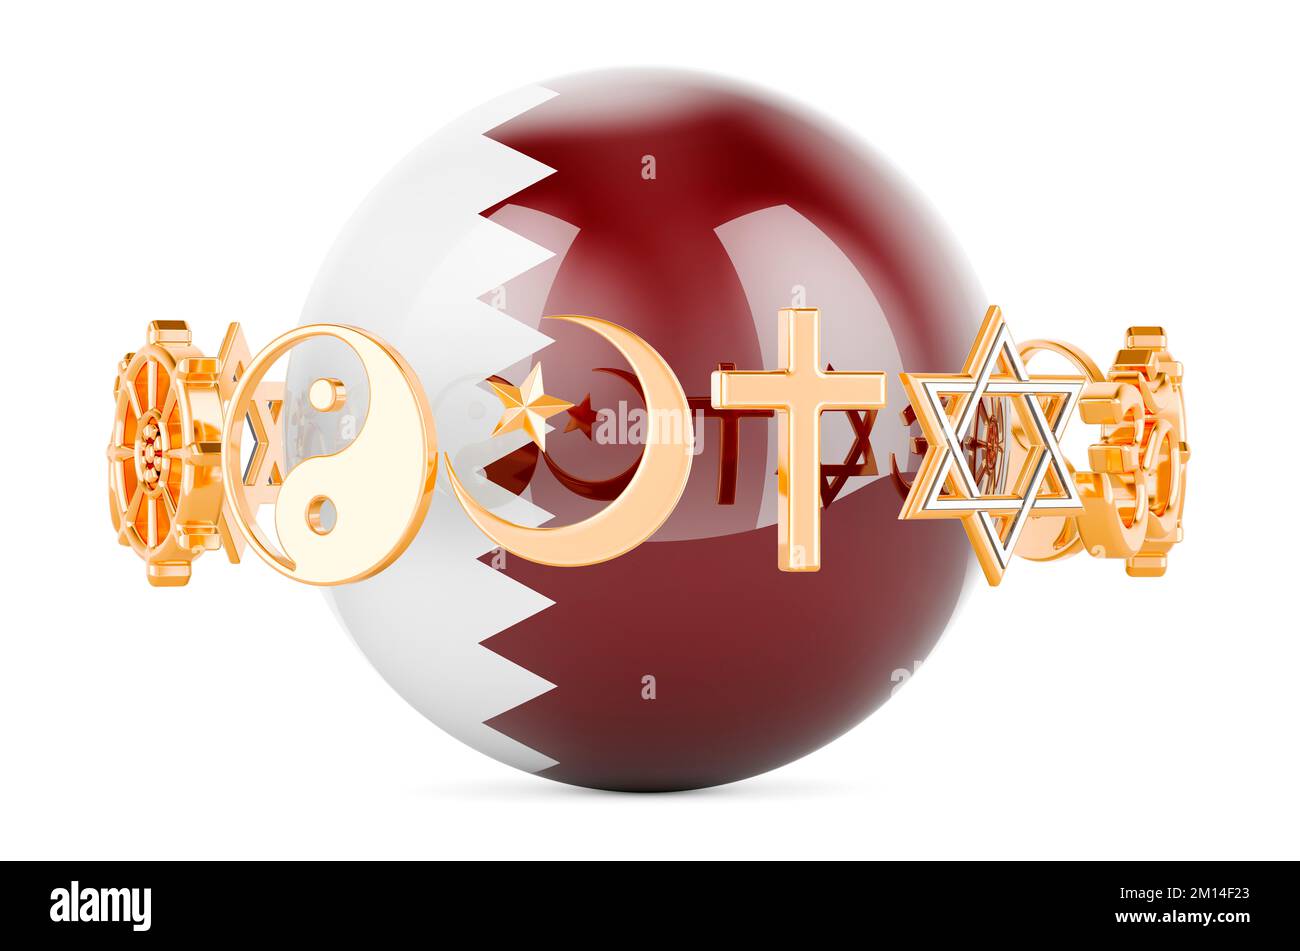 Qatari flag painted on sphere with religions symbols around, 3D rendering isolated on white background Stock Photo